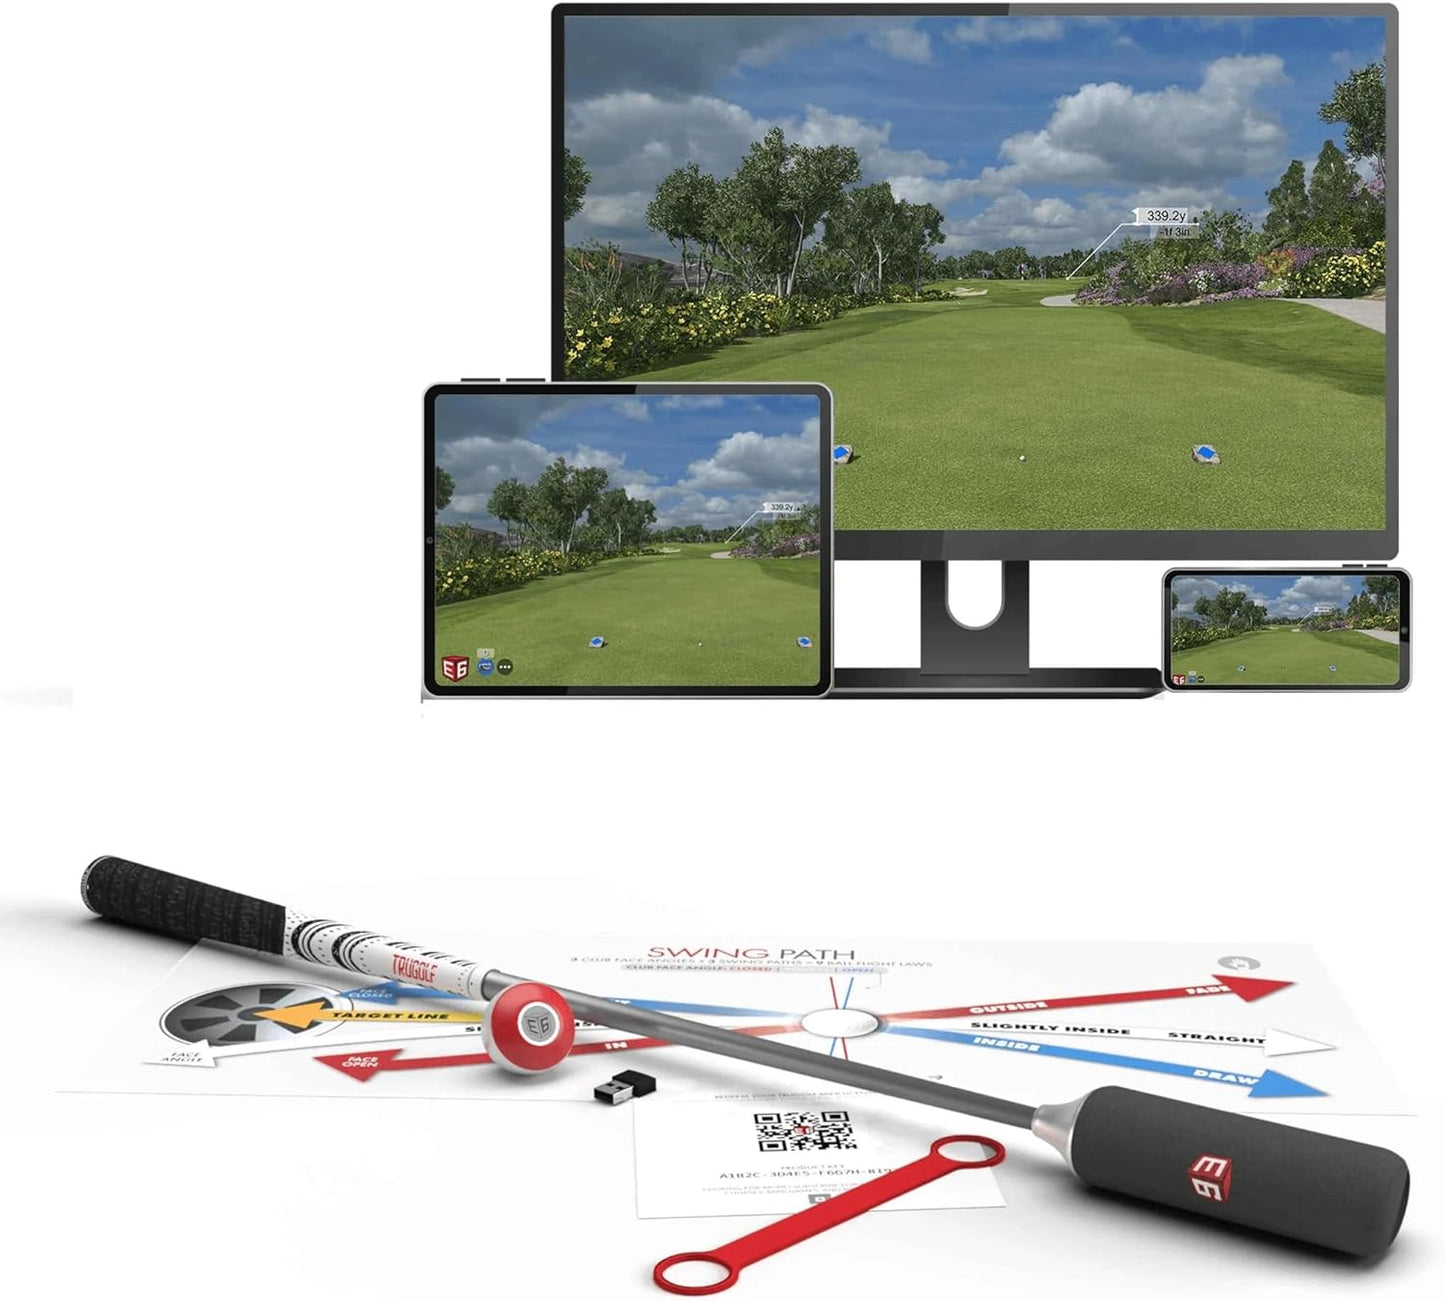 TruGolf Golf Simulator with Swing Stick, Golf Swing Trainer, Master Your Swing with Motion Sensor, 3D Swing Analysis - Works with Smartdevices